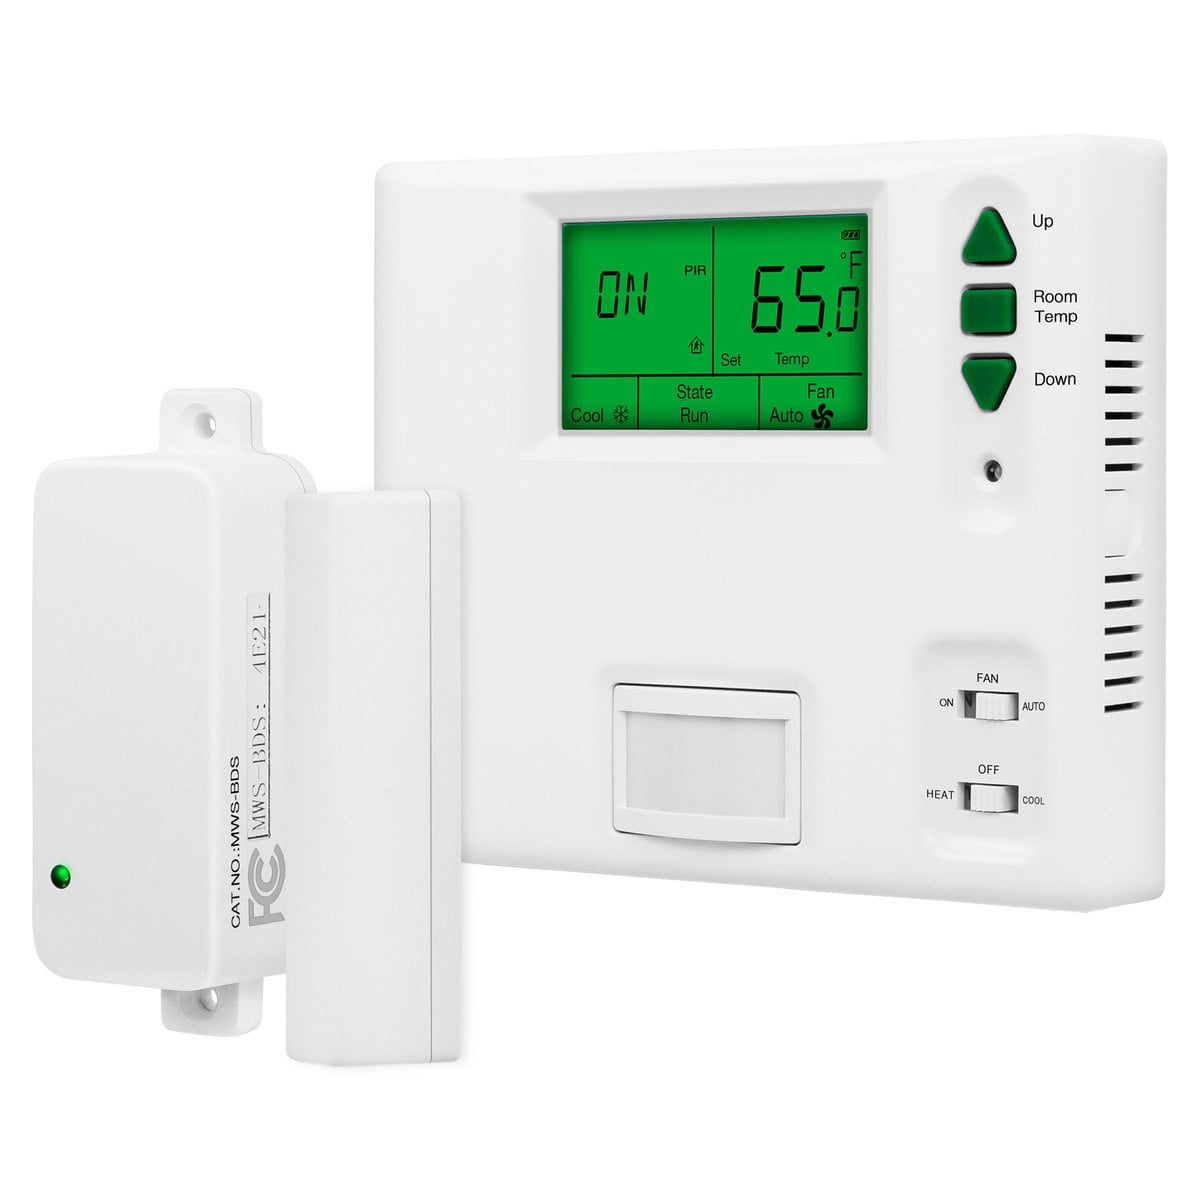 ENERLITES Digital Programmable Thermostat with PIR Motion Detector and Door Sensor for One-Stage HVAC and PTAC Units, 800 Square Feet Coverage, Backlight LCD, Fan control, 24VDC, MT110, White - image 1 of 4